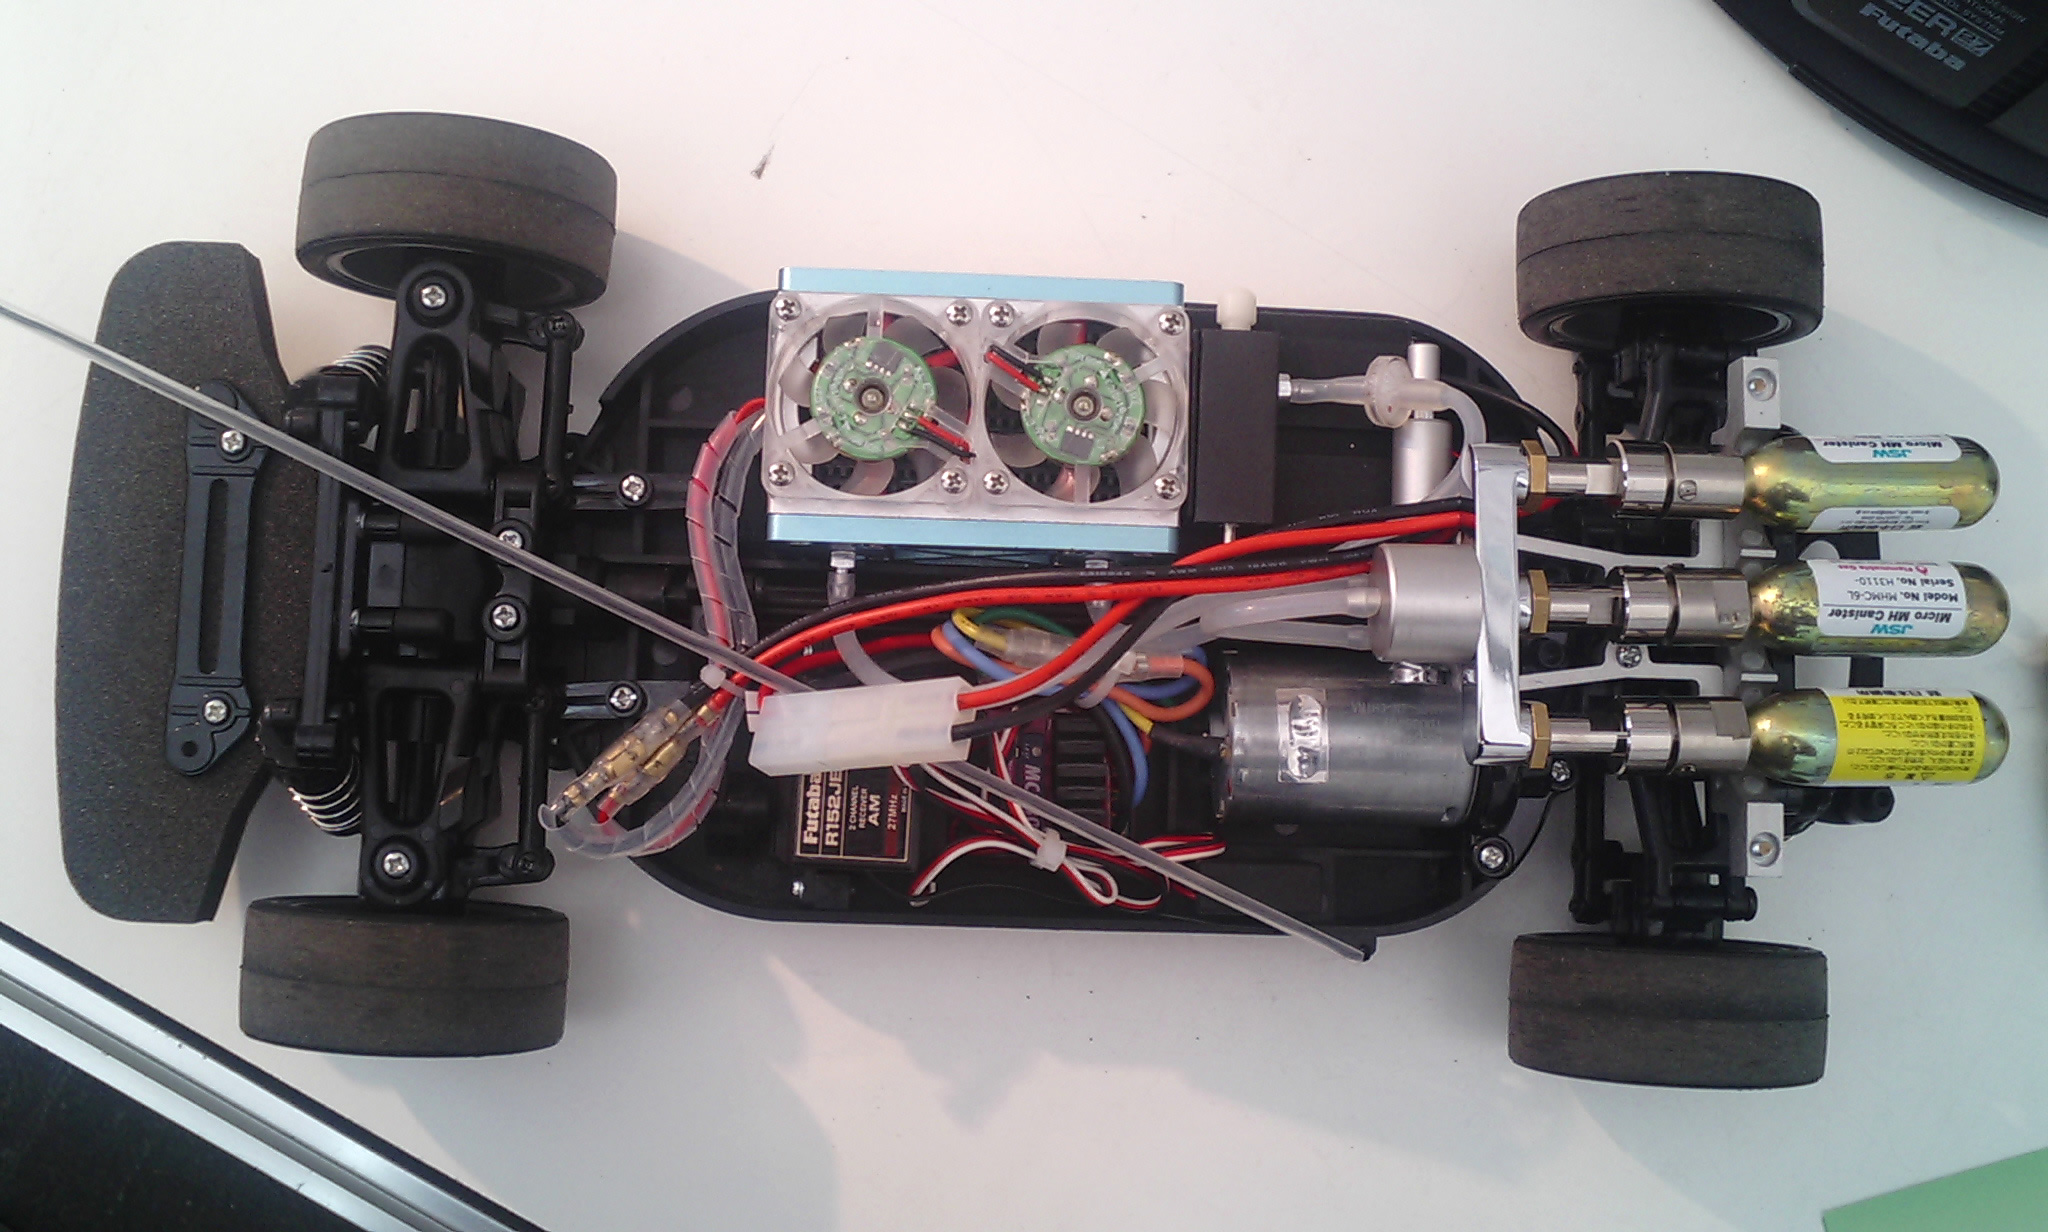 a toy car with various electronics and wires attached